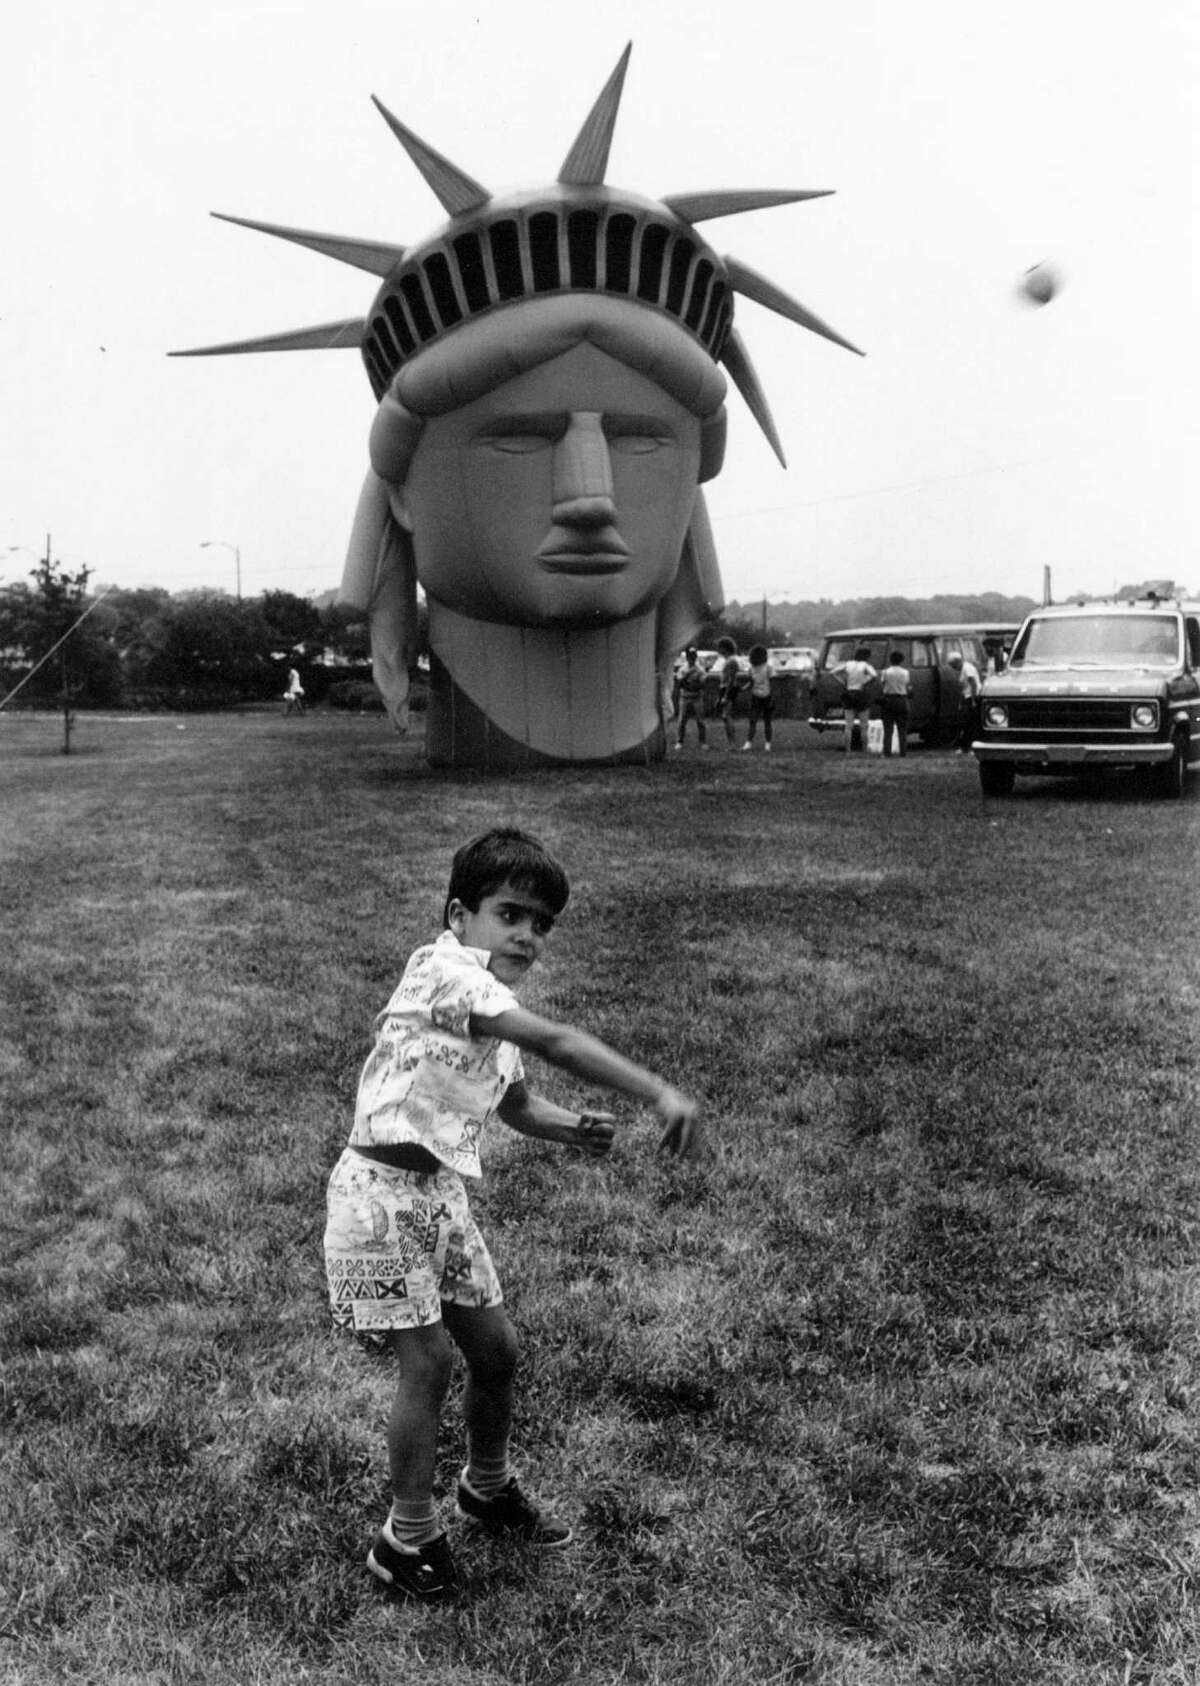 July 4, 1987: Carlos Lopez, 5, of Stamford frolics in Cummings Park in front of a balloon fasimile of the Statue of Liberty's head. The balloon was set to float above the park in the city's fourth of July celebration.